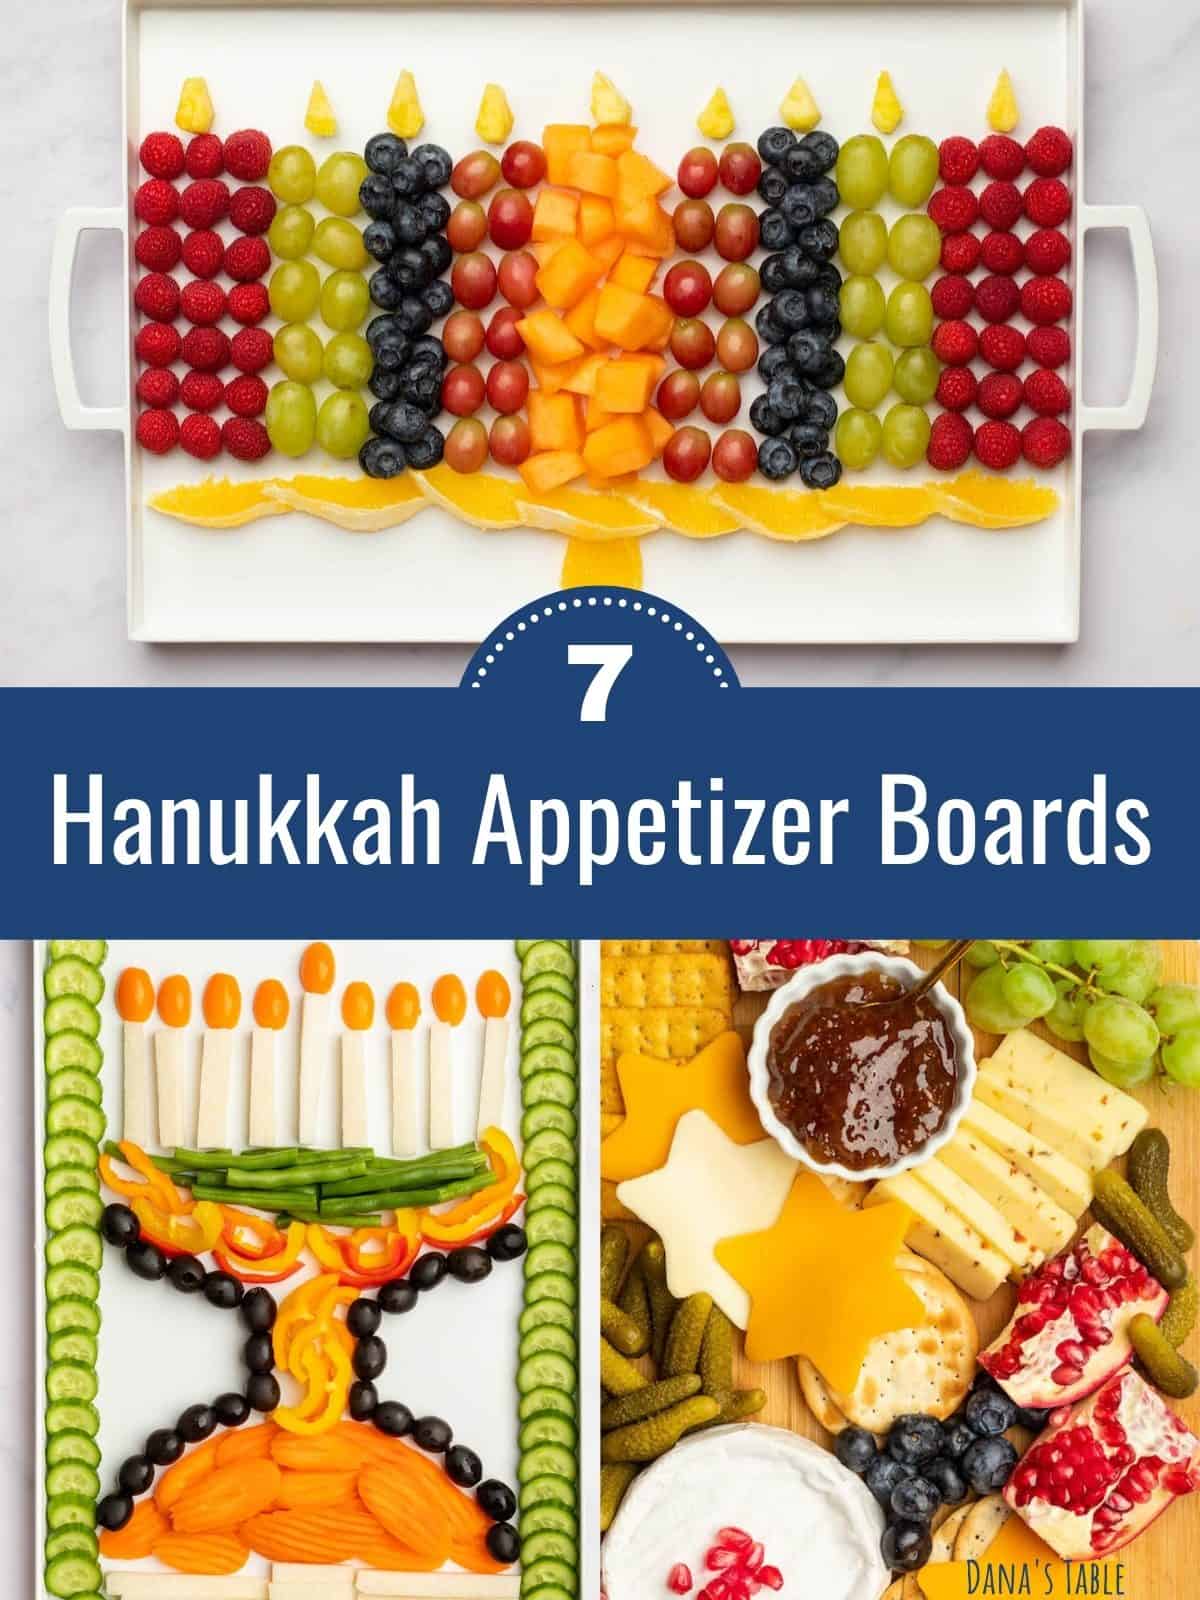 Collage of menorah made out of fruits and vegetables and Star of David cheese board.